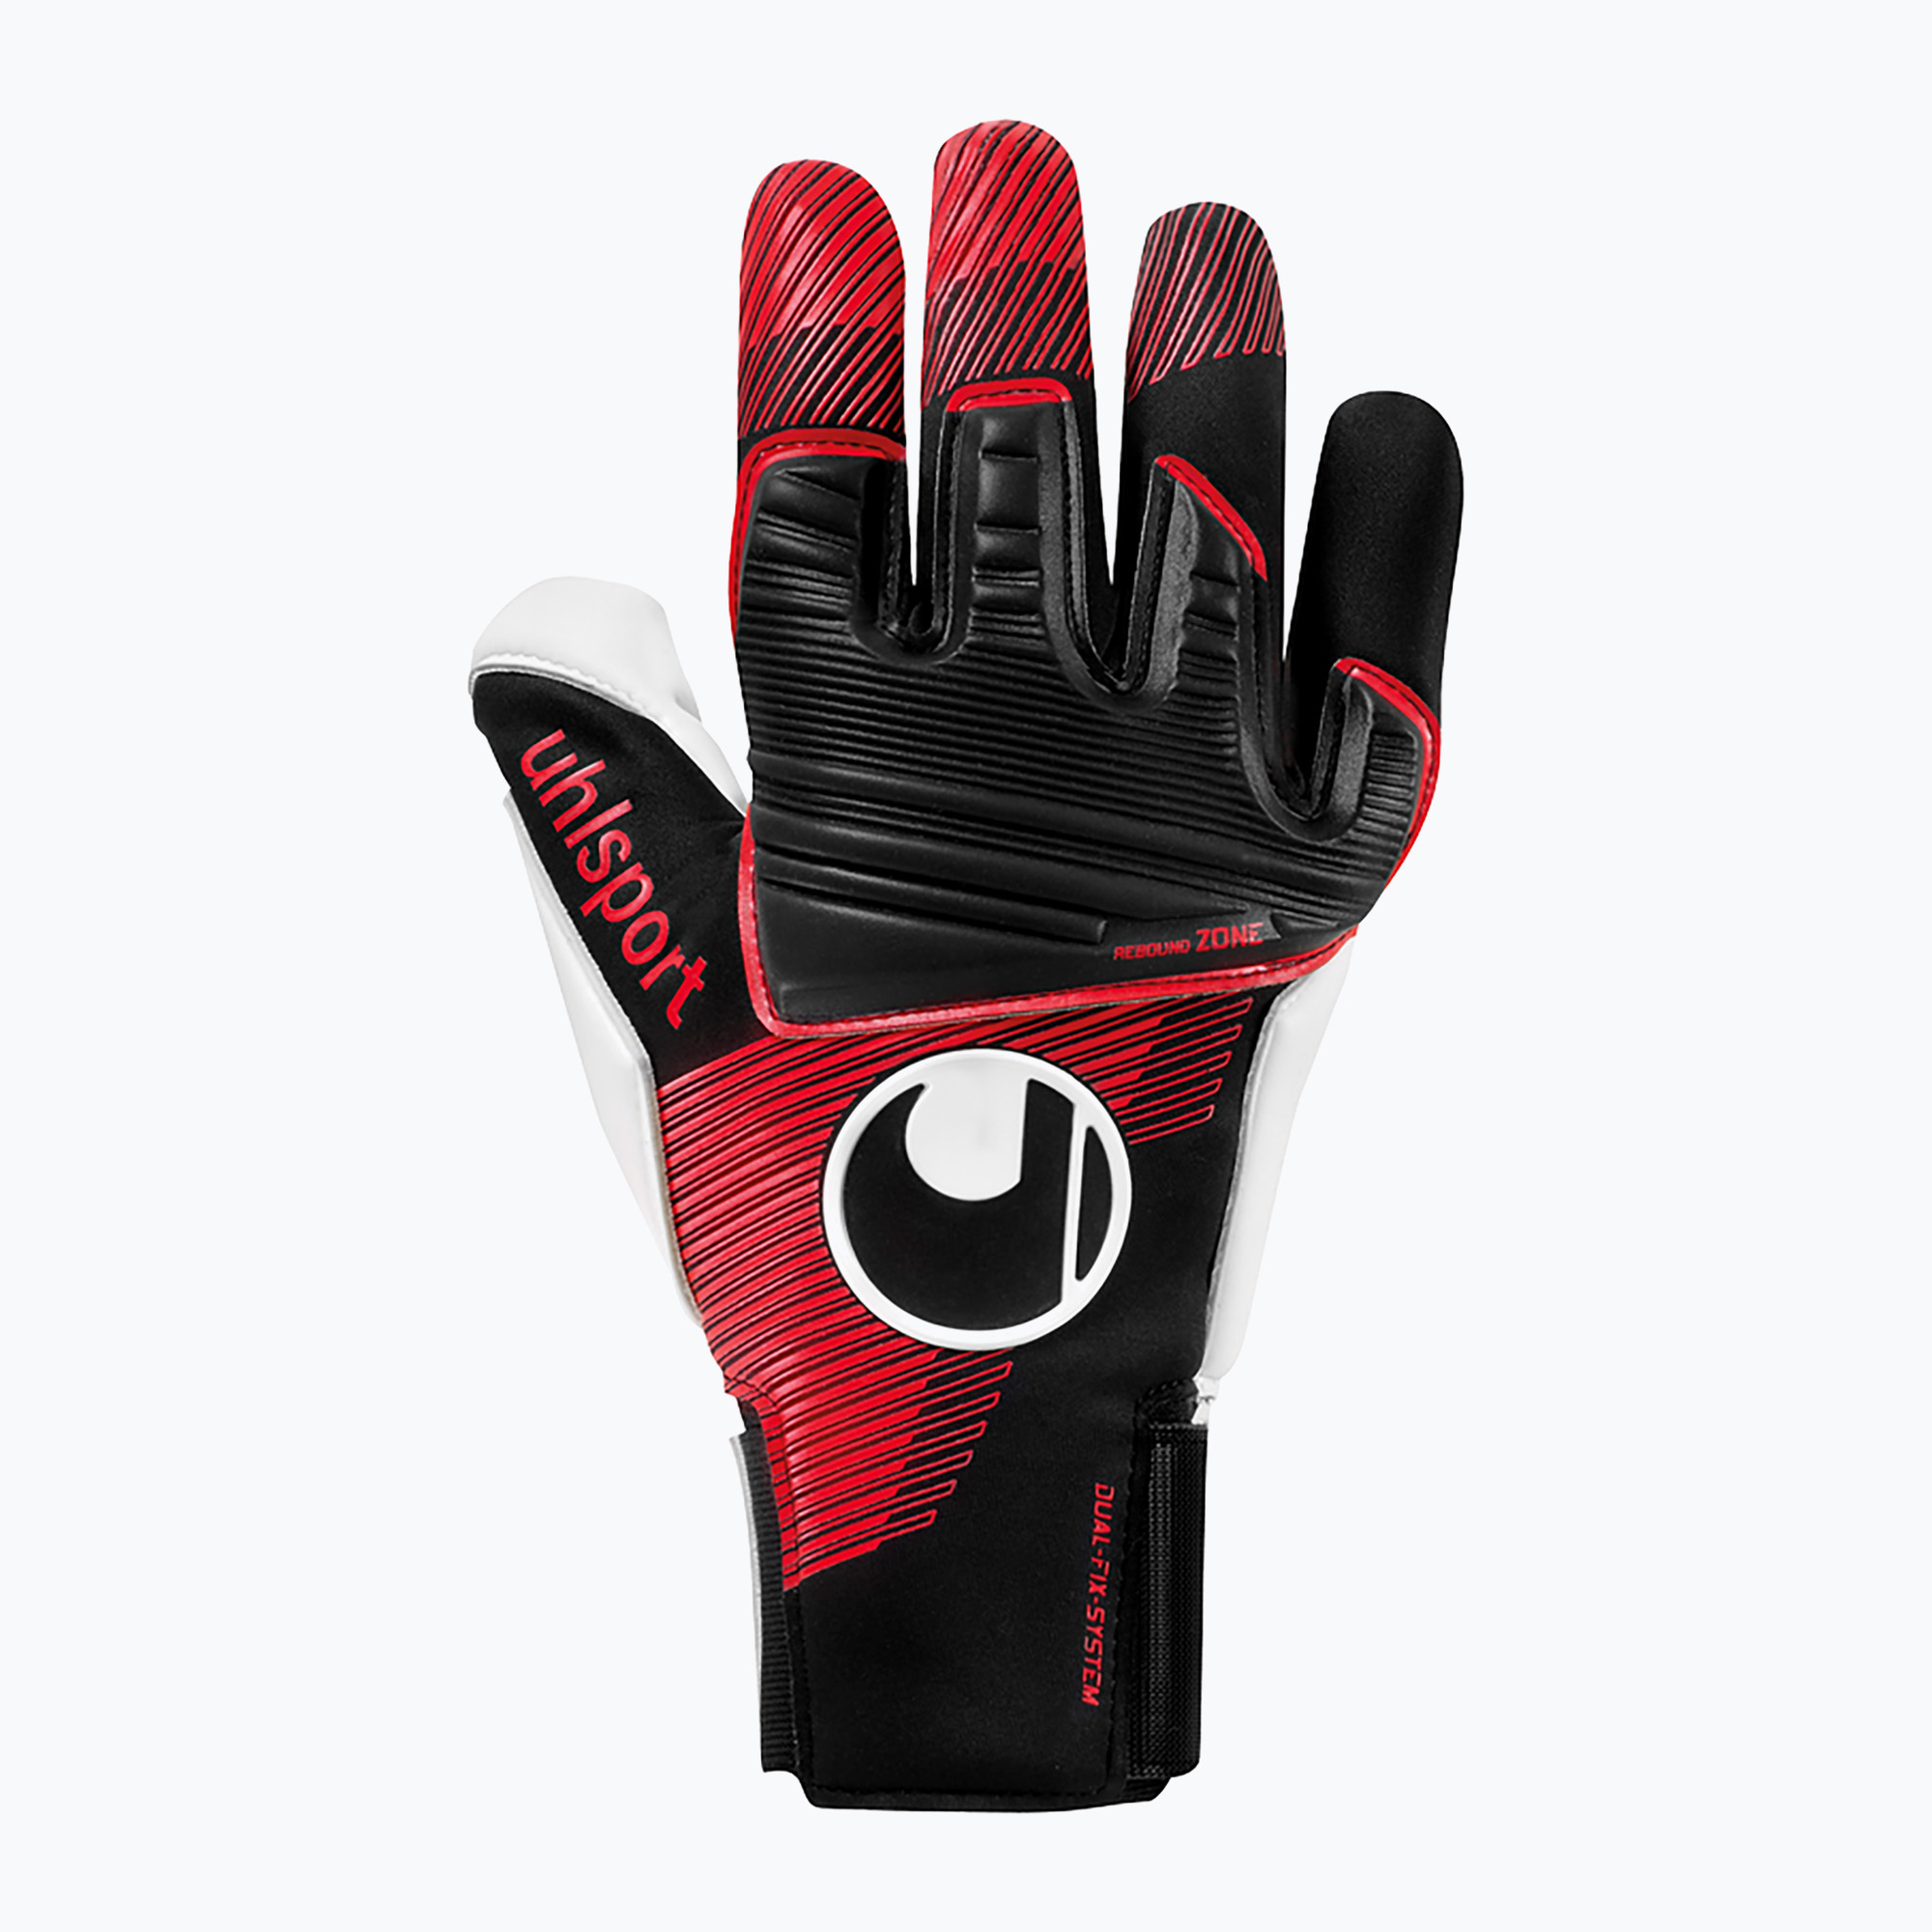 Детски вратарски ръкавици uhlsport Powerline Absolutgrip black/red/white